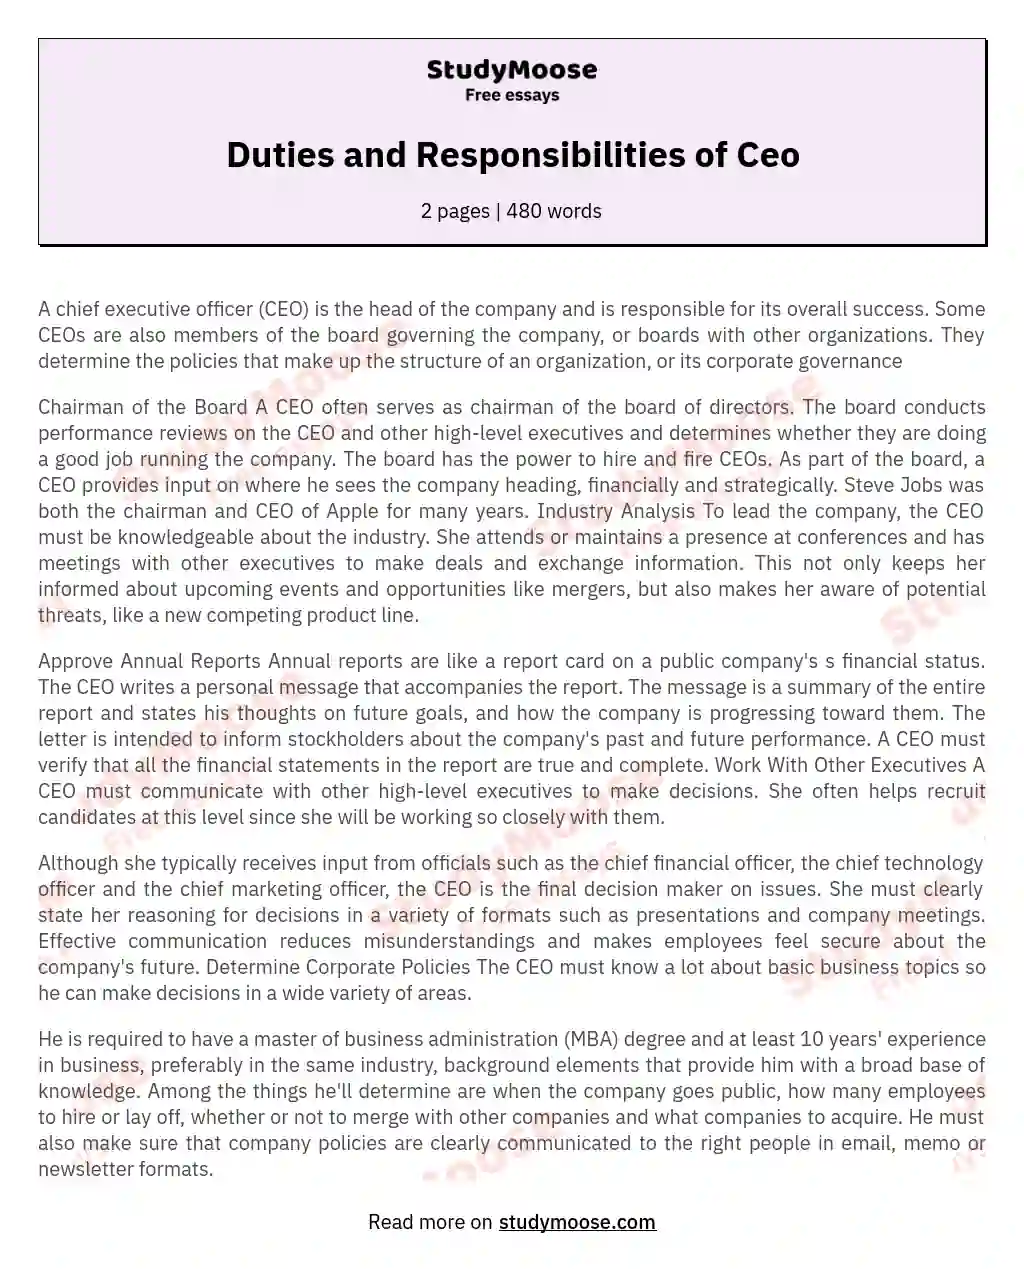 Duties and Responsibilities of Ceo